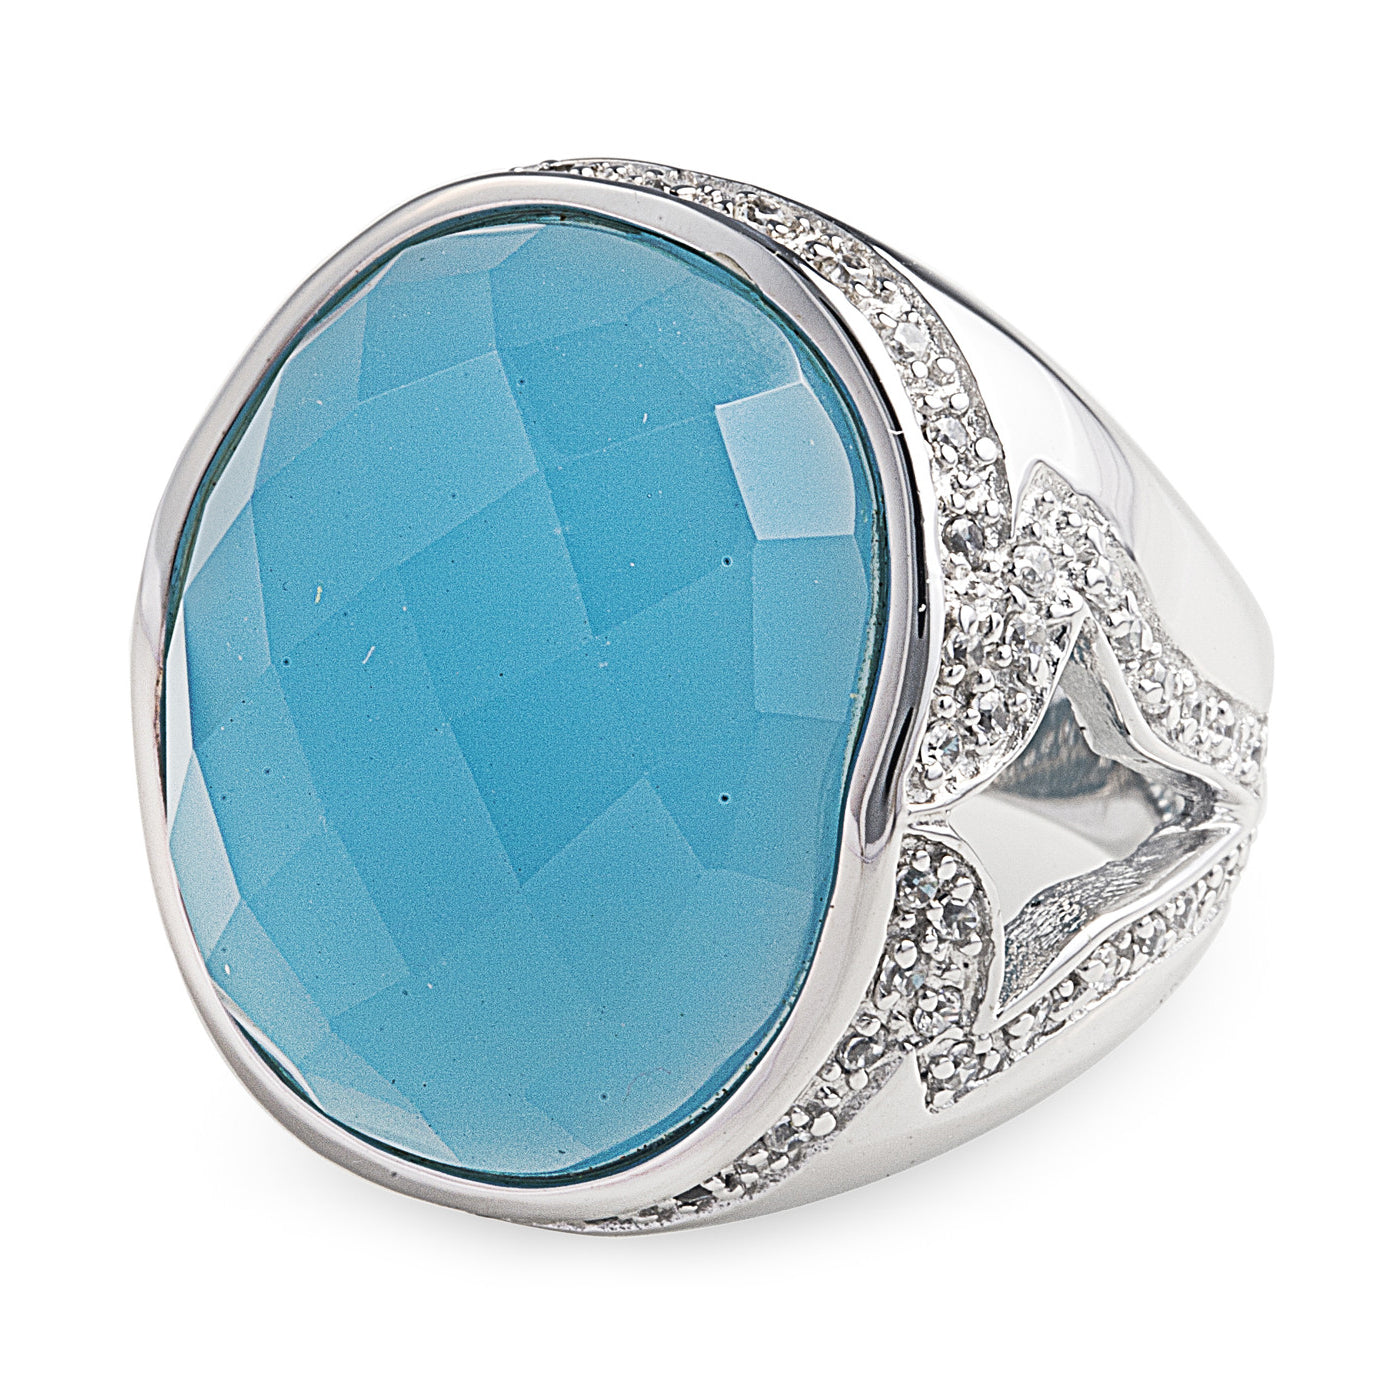 The Sky Blue Lopez Ring is made of 925 sterling silver featuring a beautiful side pattern encrusted with cubic zirconia stones that hold in place a stunning facet cut Milky Blue Obsidian that grabs lots of attention. Worldwide Shipping. Jewellery by Bellagio & Co.